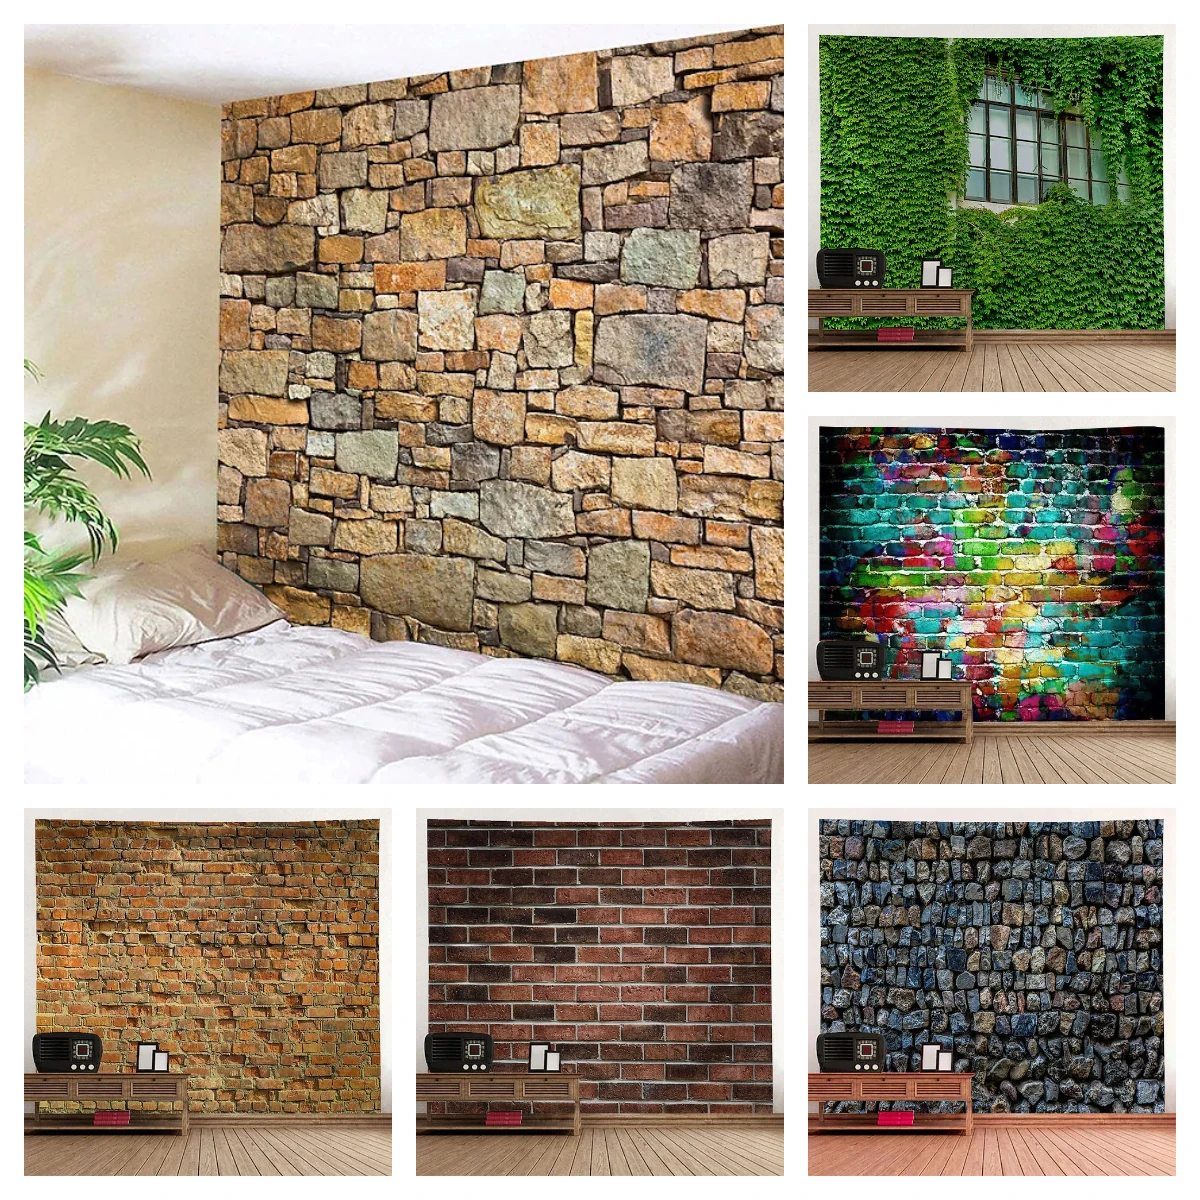 

Brick Wall Tapestry Rustic Wood Board Aesthetic Room Decor Rock Wall Tapestries Art Bohemian Home Decoration Accessories Polyest